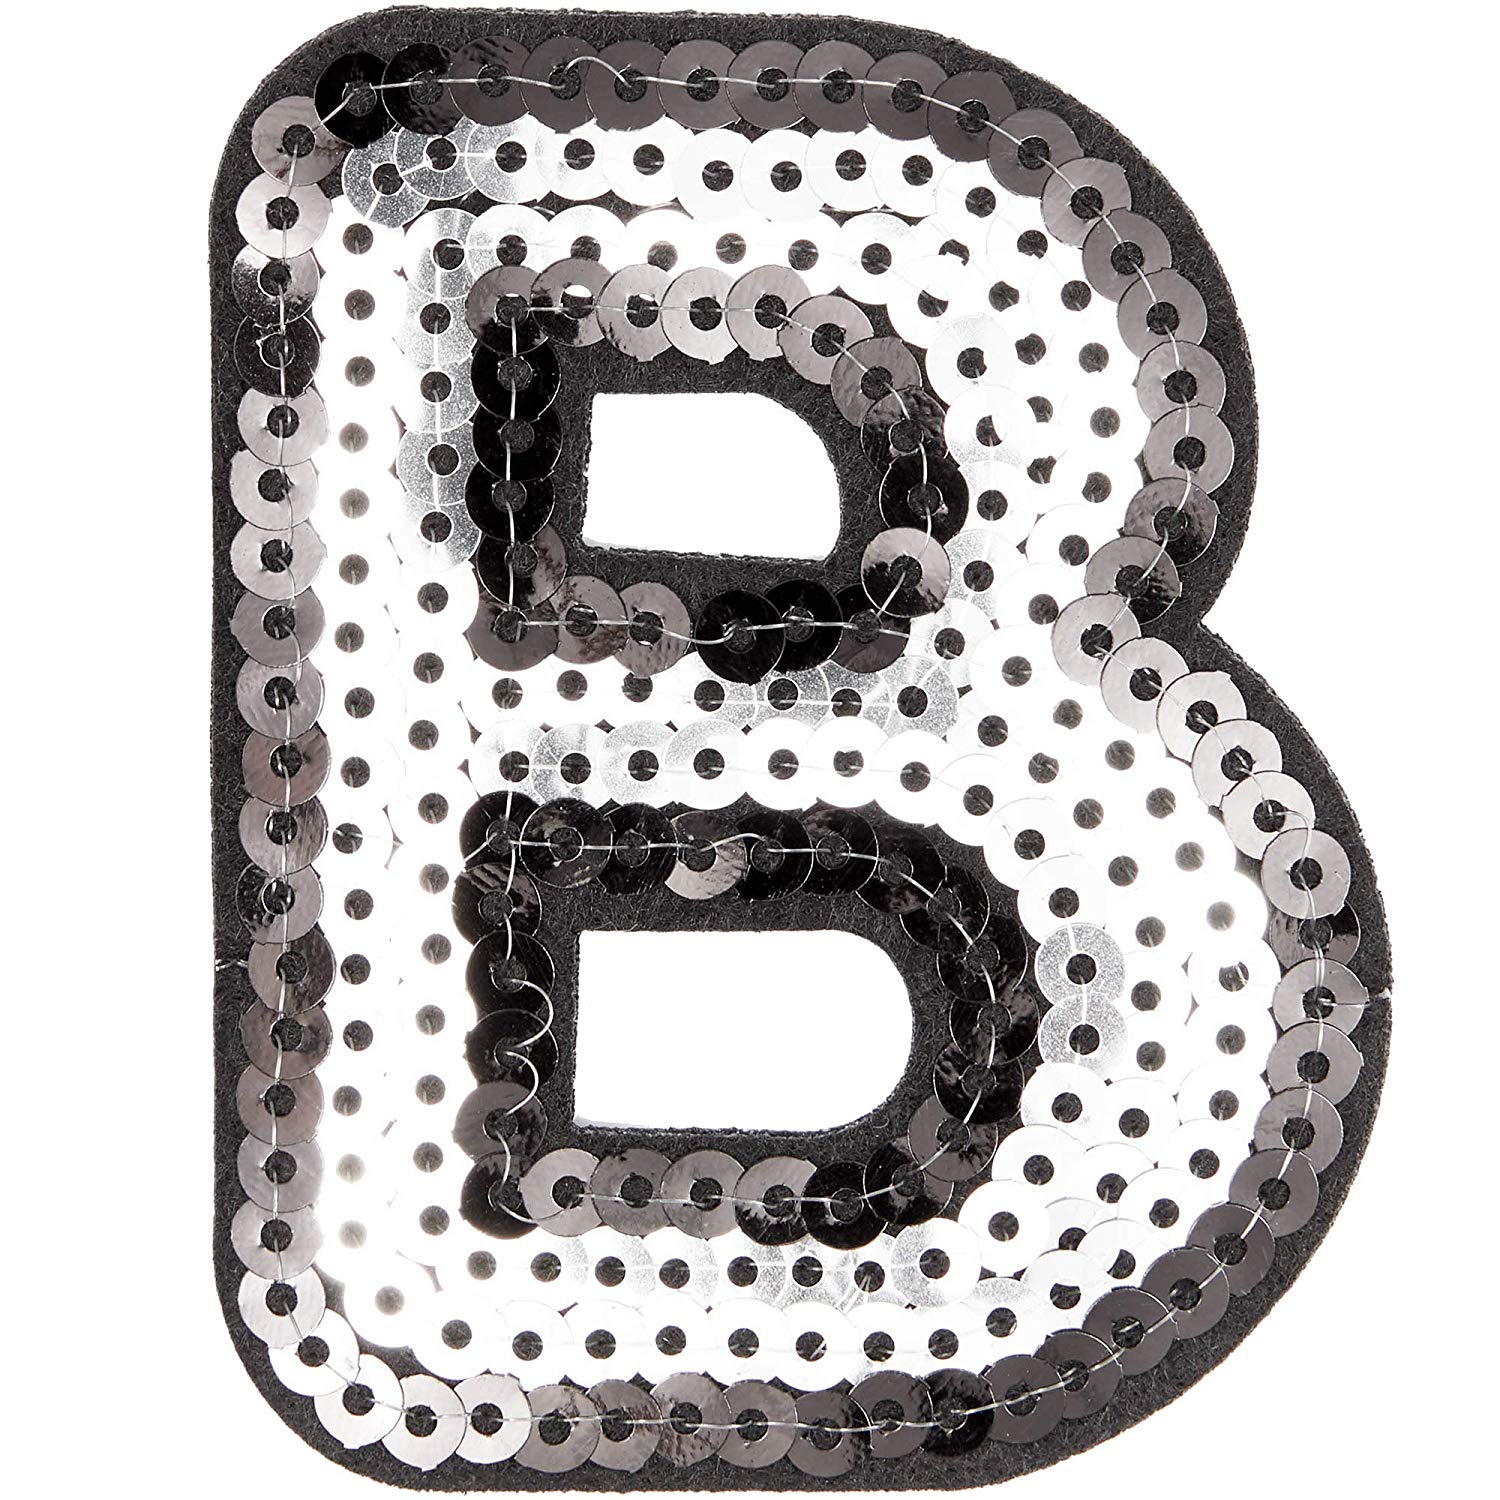 3 Embroidered Iron-On Letter Patches, Alphabet Appliques, Letter Patches  for Clothing, DIY Craft - White/Black/White